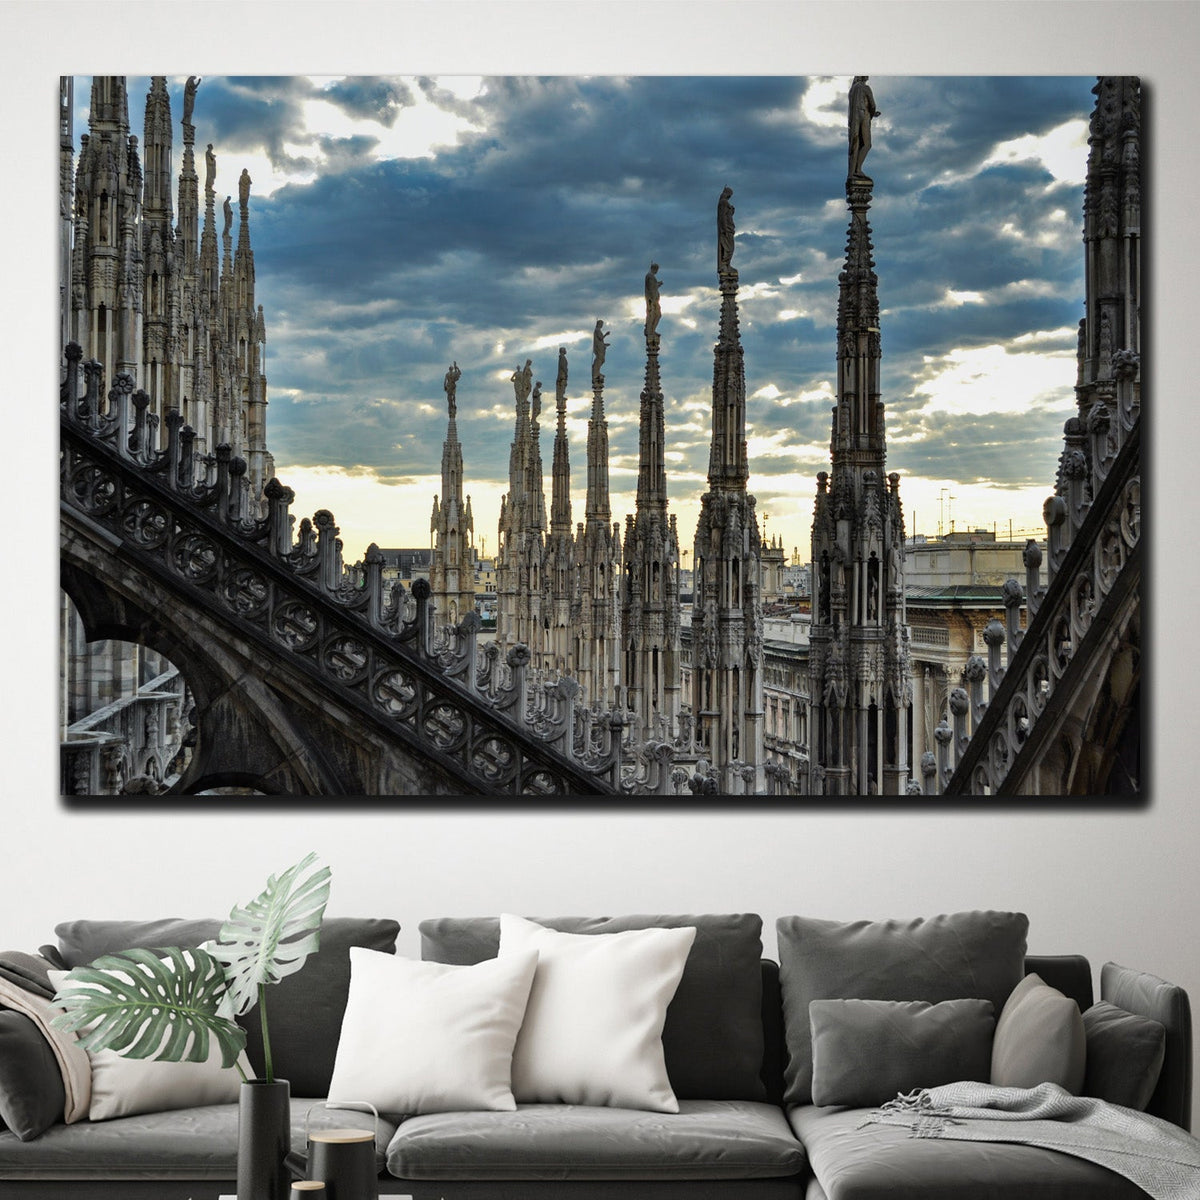 https://cdn.shopify.com/s/files/1/0387/9986/8044/products/RoofTerracesofCathedralDuomoCanvasArtprintStretched-4.jpg